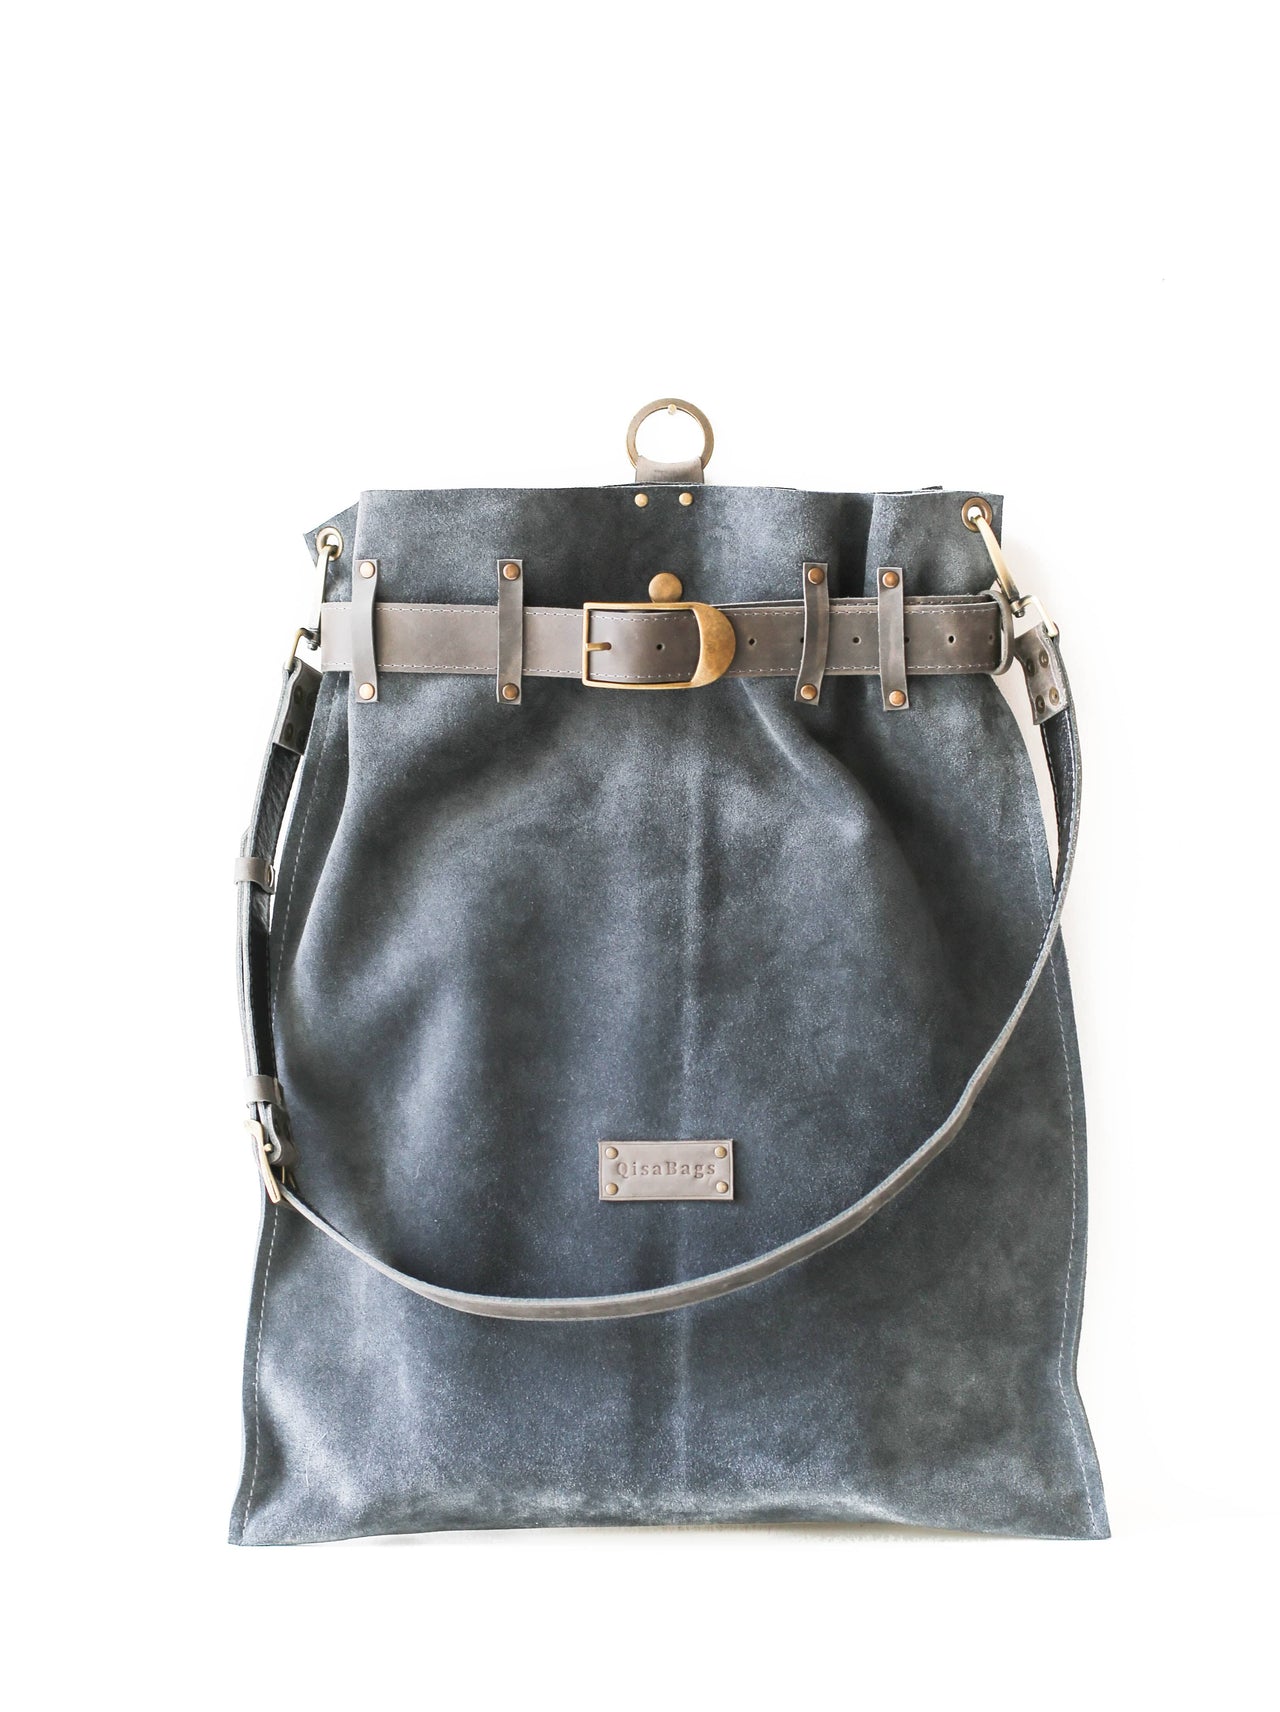 Suede Leather Bag